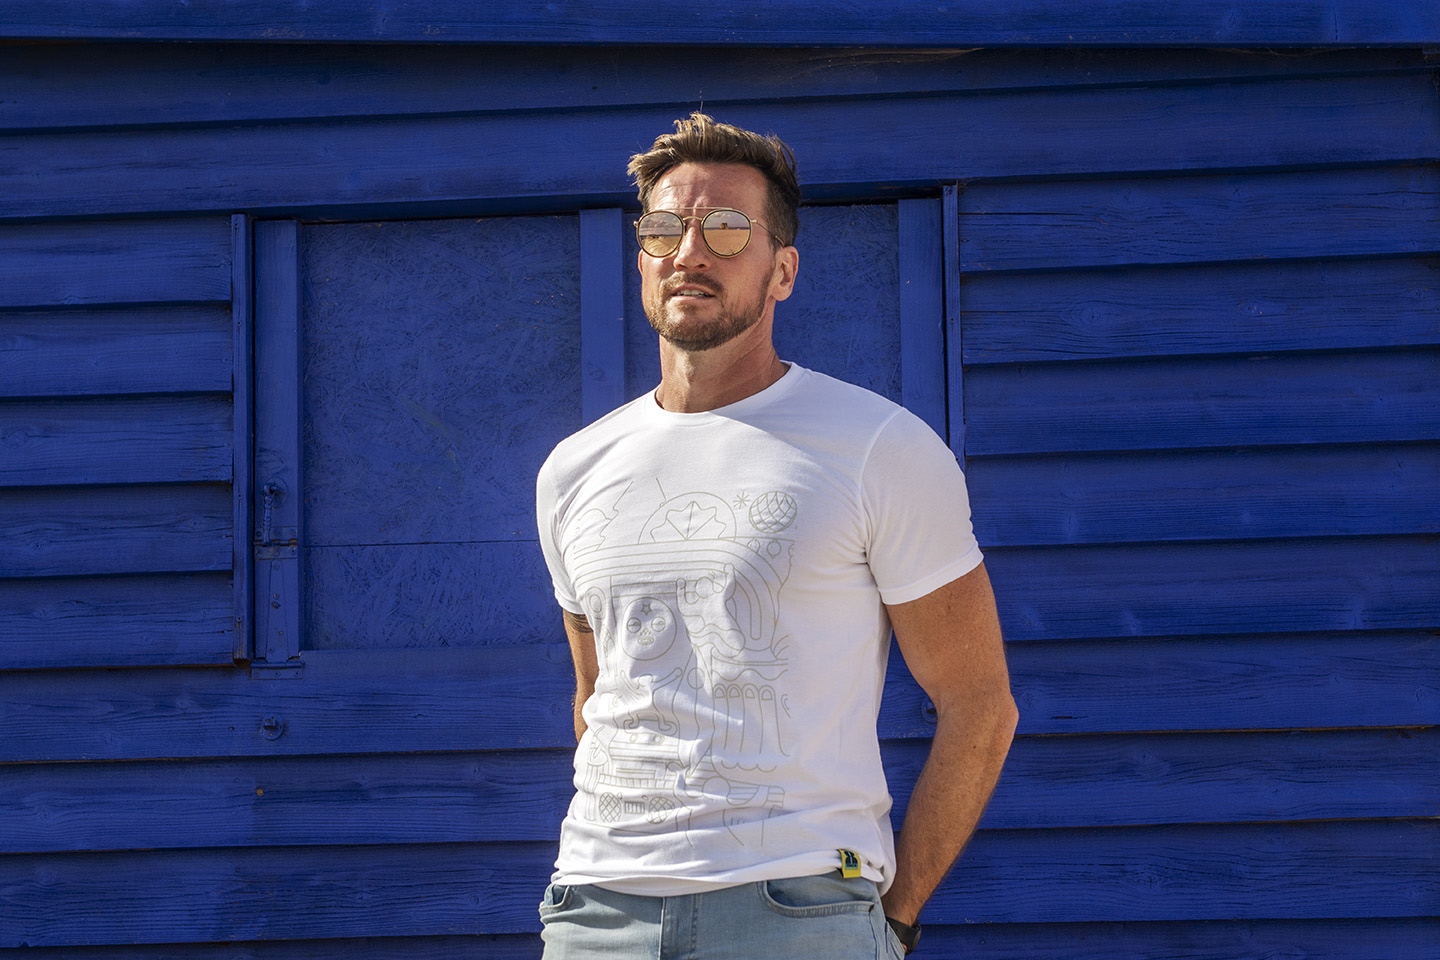 A male model stands in front of rich royal blue painted wooden background, wearing a white 8Track Rum branded t-shirt and mirrored sunglasses.